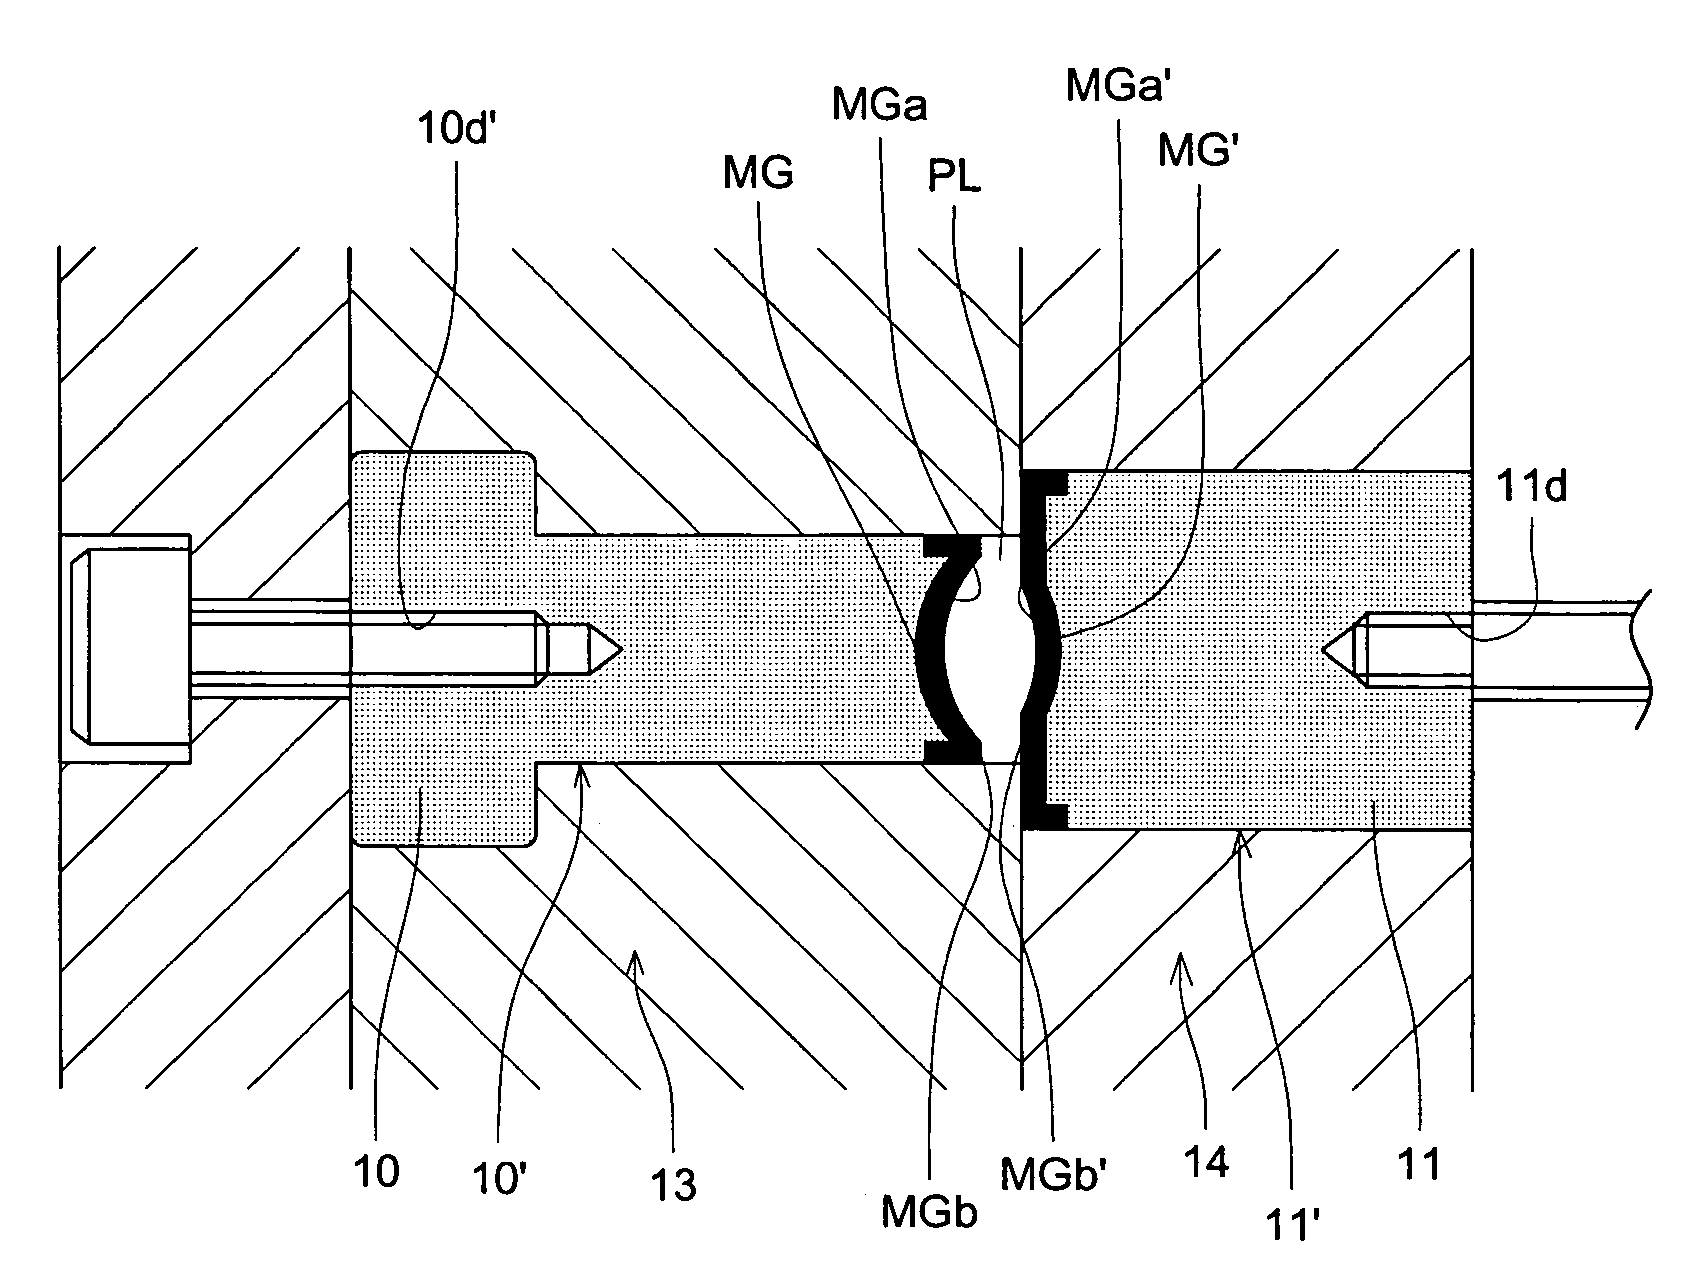 Metallic mold for optical element and optical element